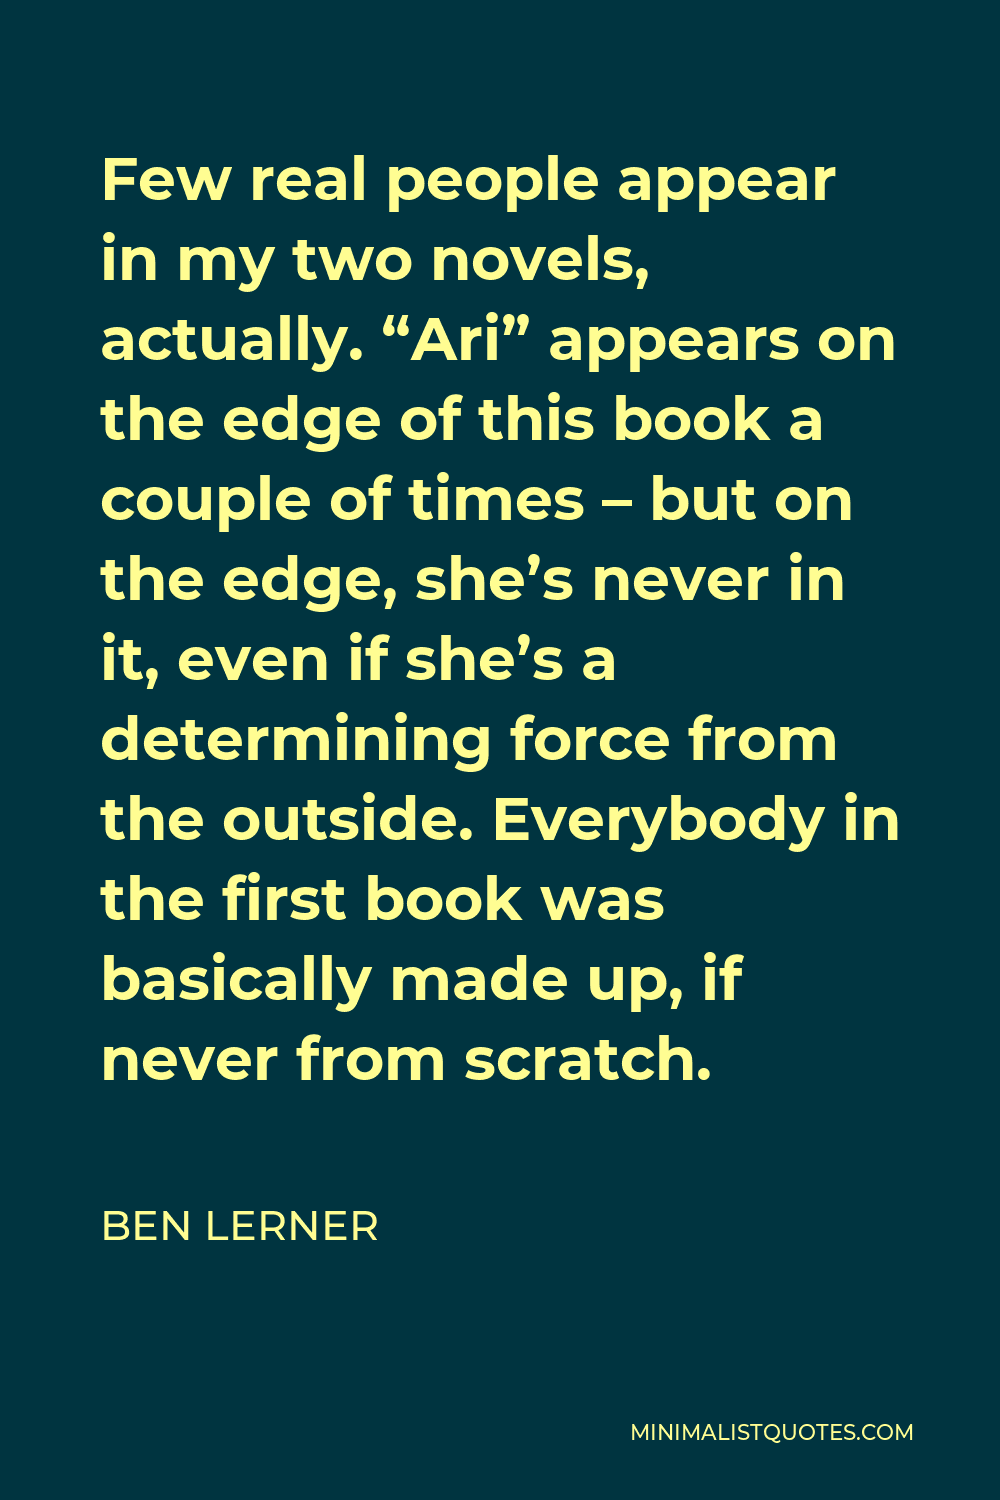 Ben Lerner Quote - Few real people appear in my two novels, actually. “Ari” appears on the edge of this book a couple of times – but on the edge, she’s never in it, even if she’s a determining force from the outside. Everybody in the first book was basically made up, if never from scratch.